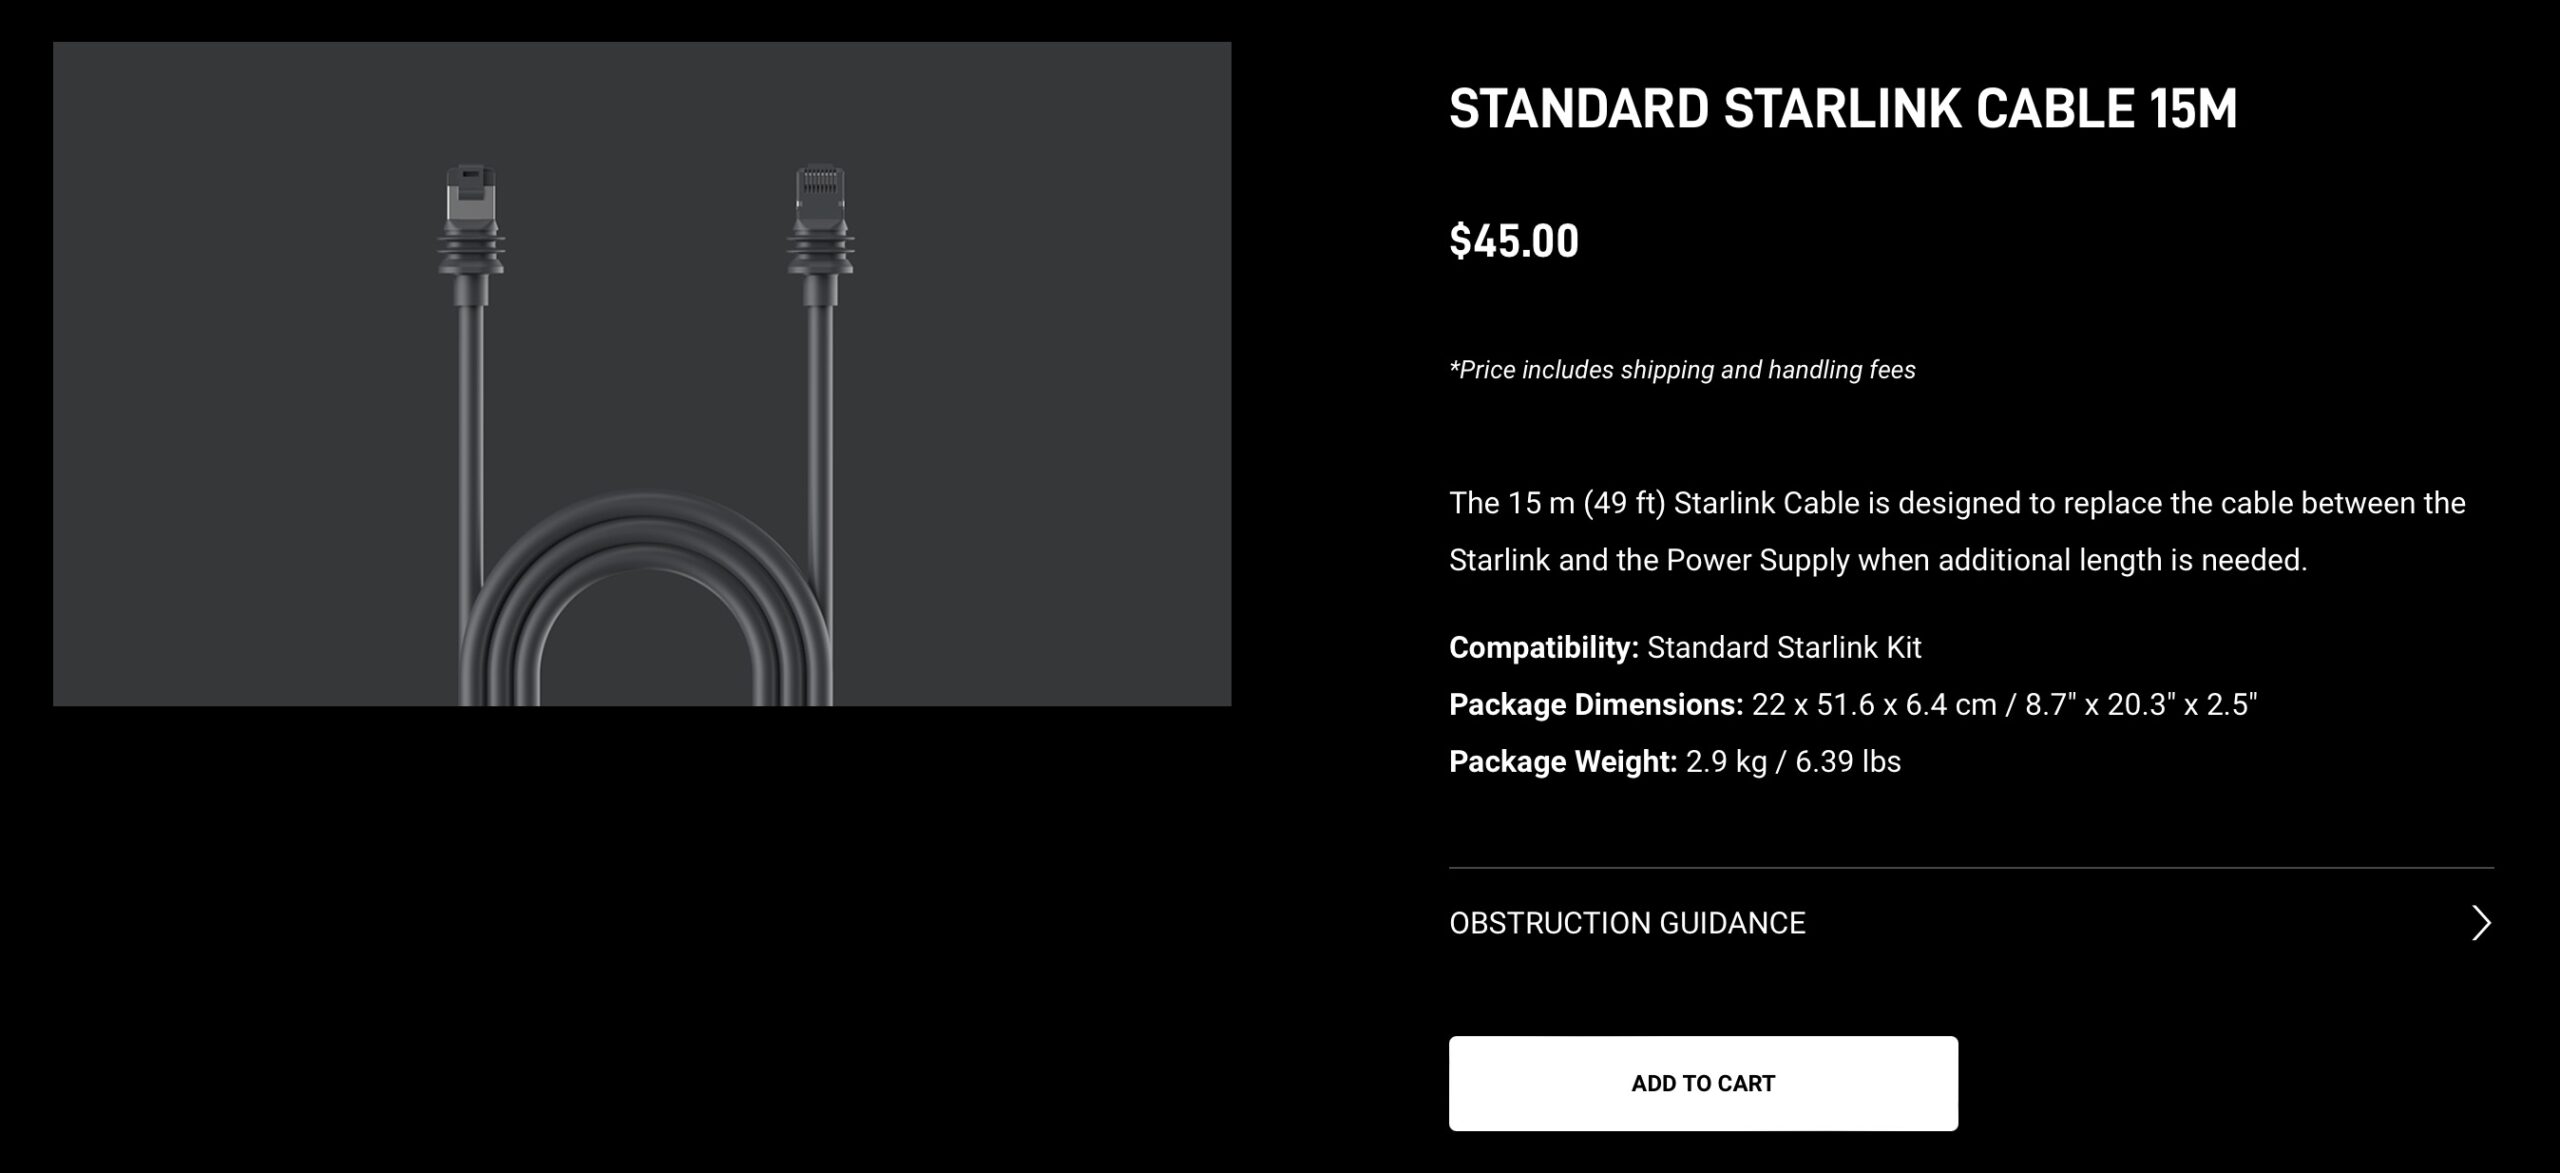 Starlink shop page for the 15M Standard Starlink cable.